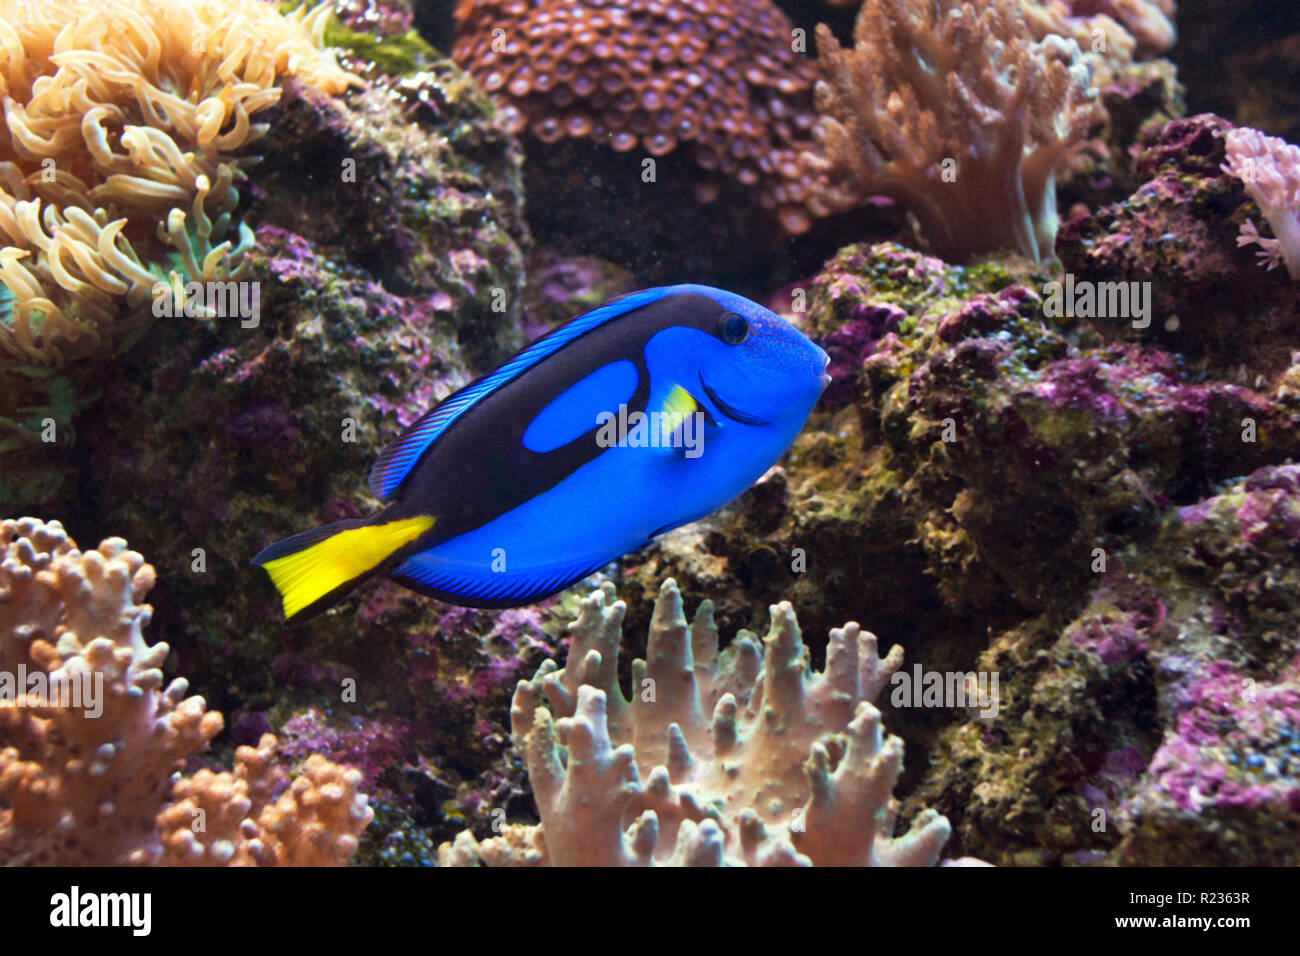 Blue surgeonfish, Paracanthurus hepatus also known as the blue tang. Wild life animal. Stock Photo